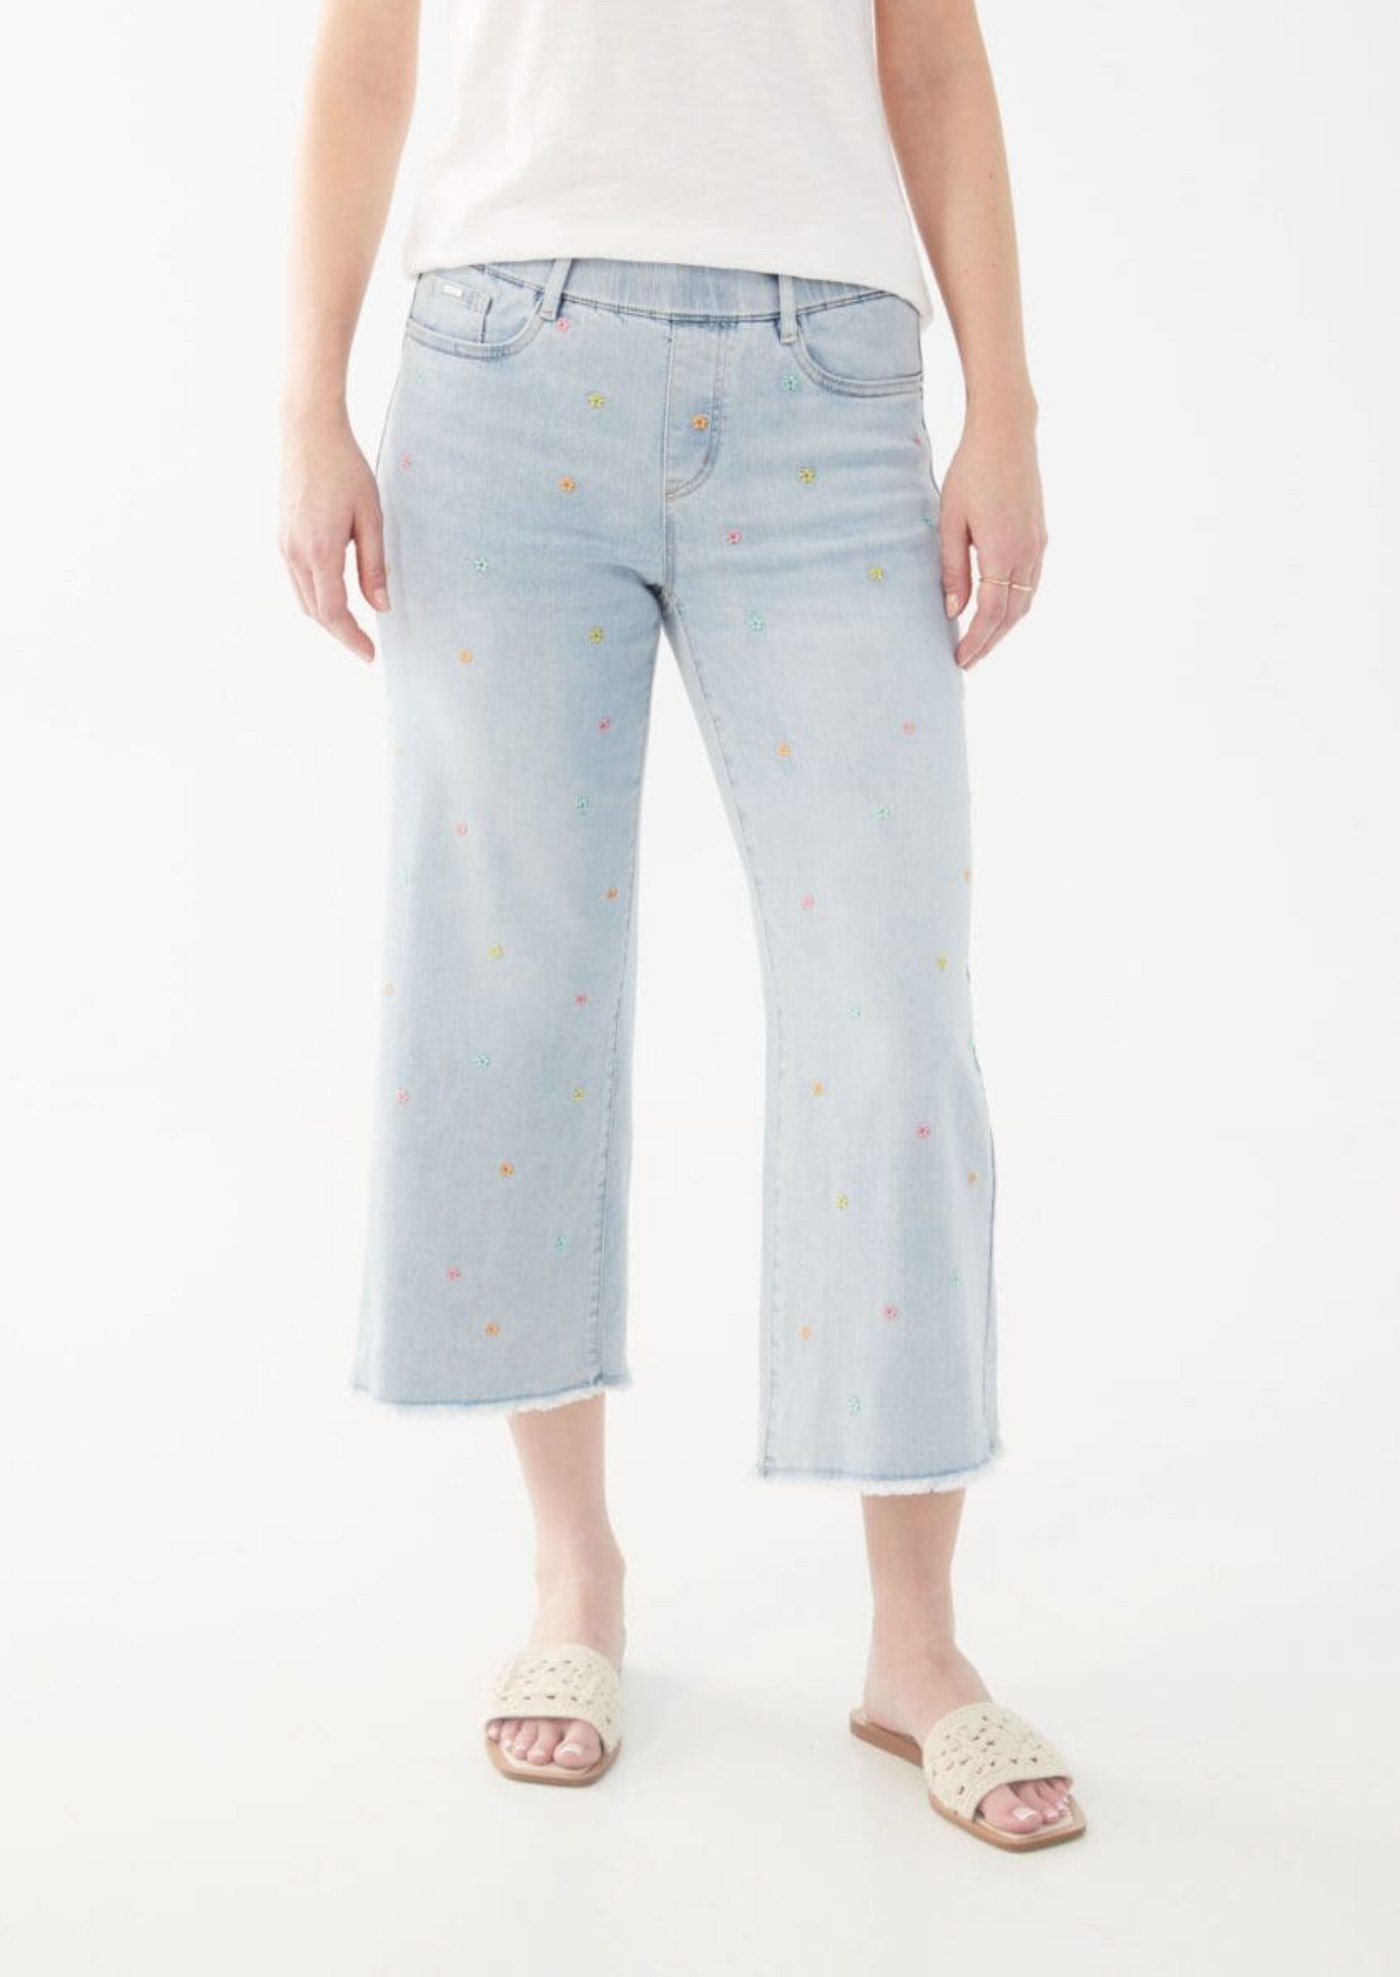 Flower Power Embroidered Jean